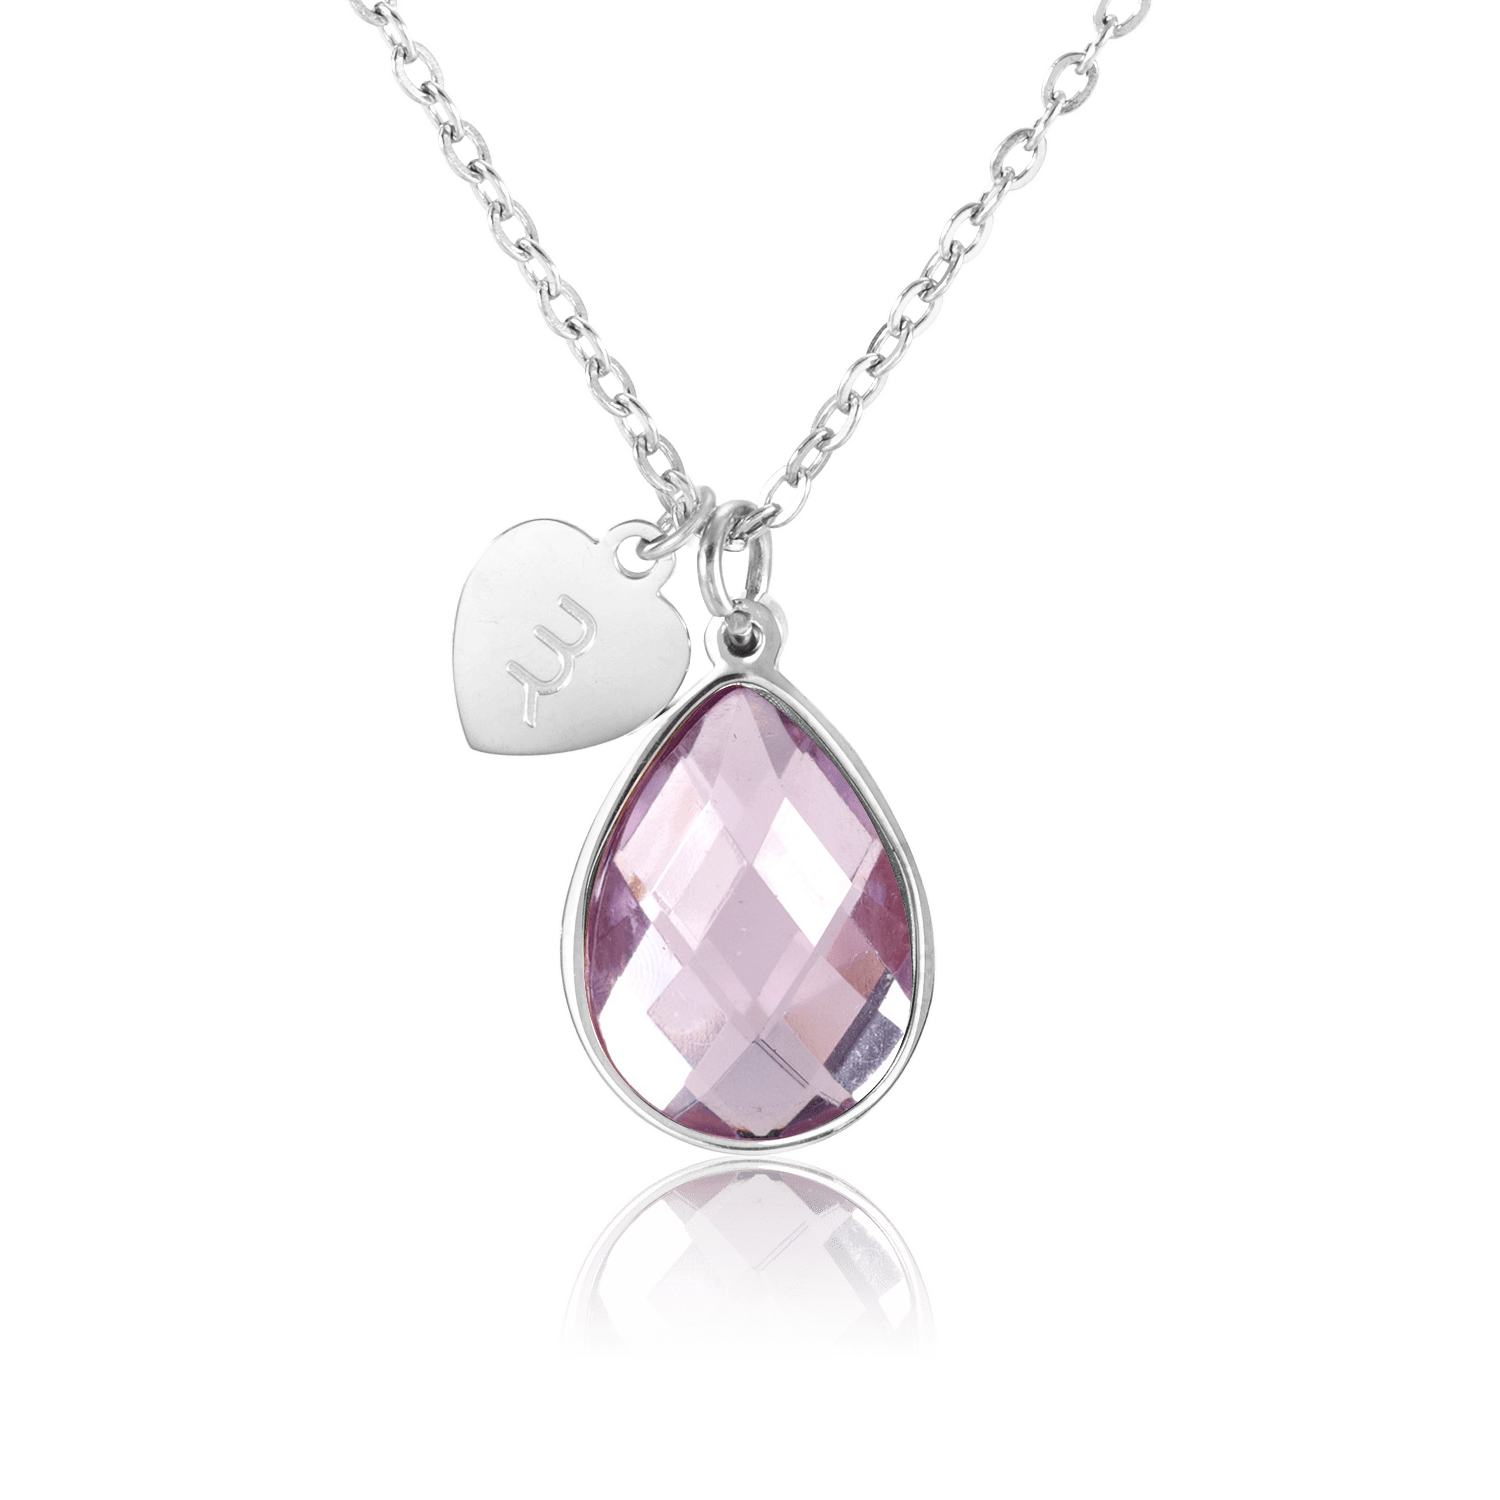 bianco rosso Necklaces Silver August Birthstone - Alexandrite cyprus greece jewelry gift free shipping europe worldwide